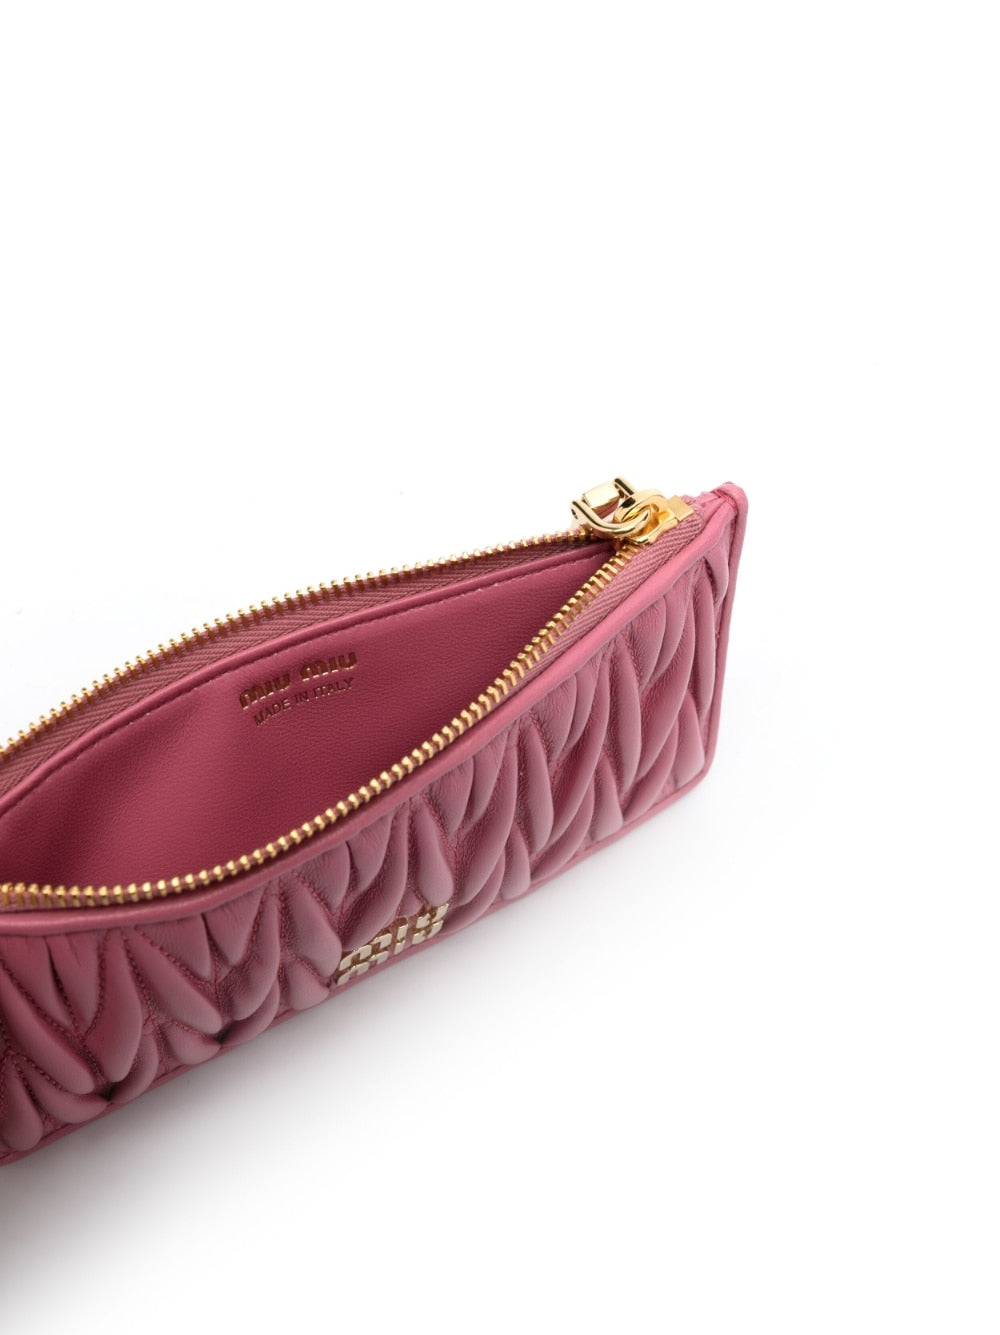 MIUMIU PINK LEATHER CARD HOLDER WITH ZIPPER